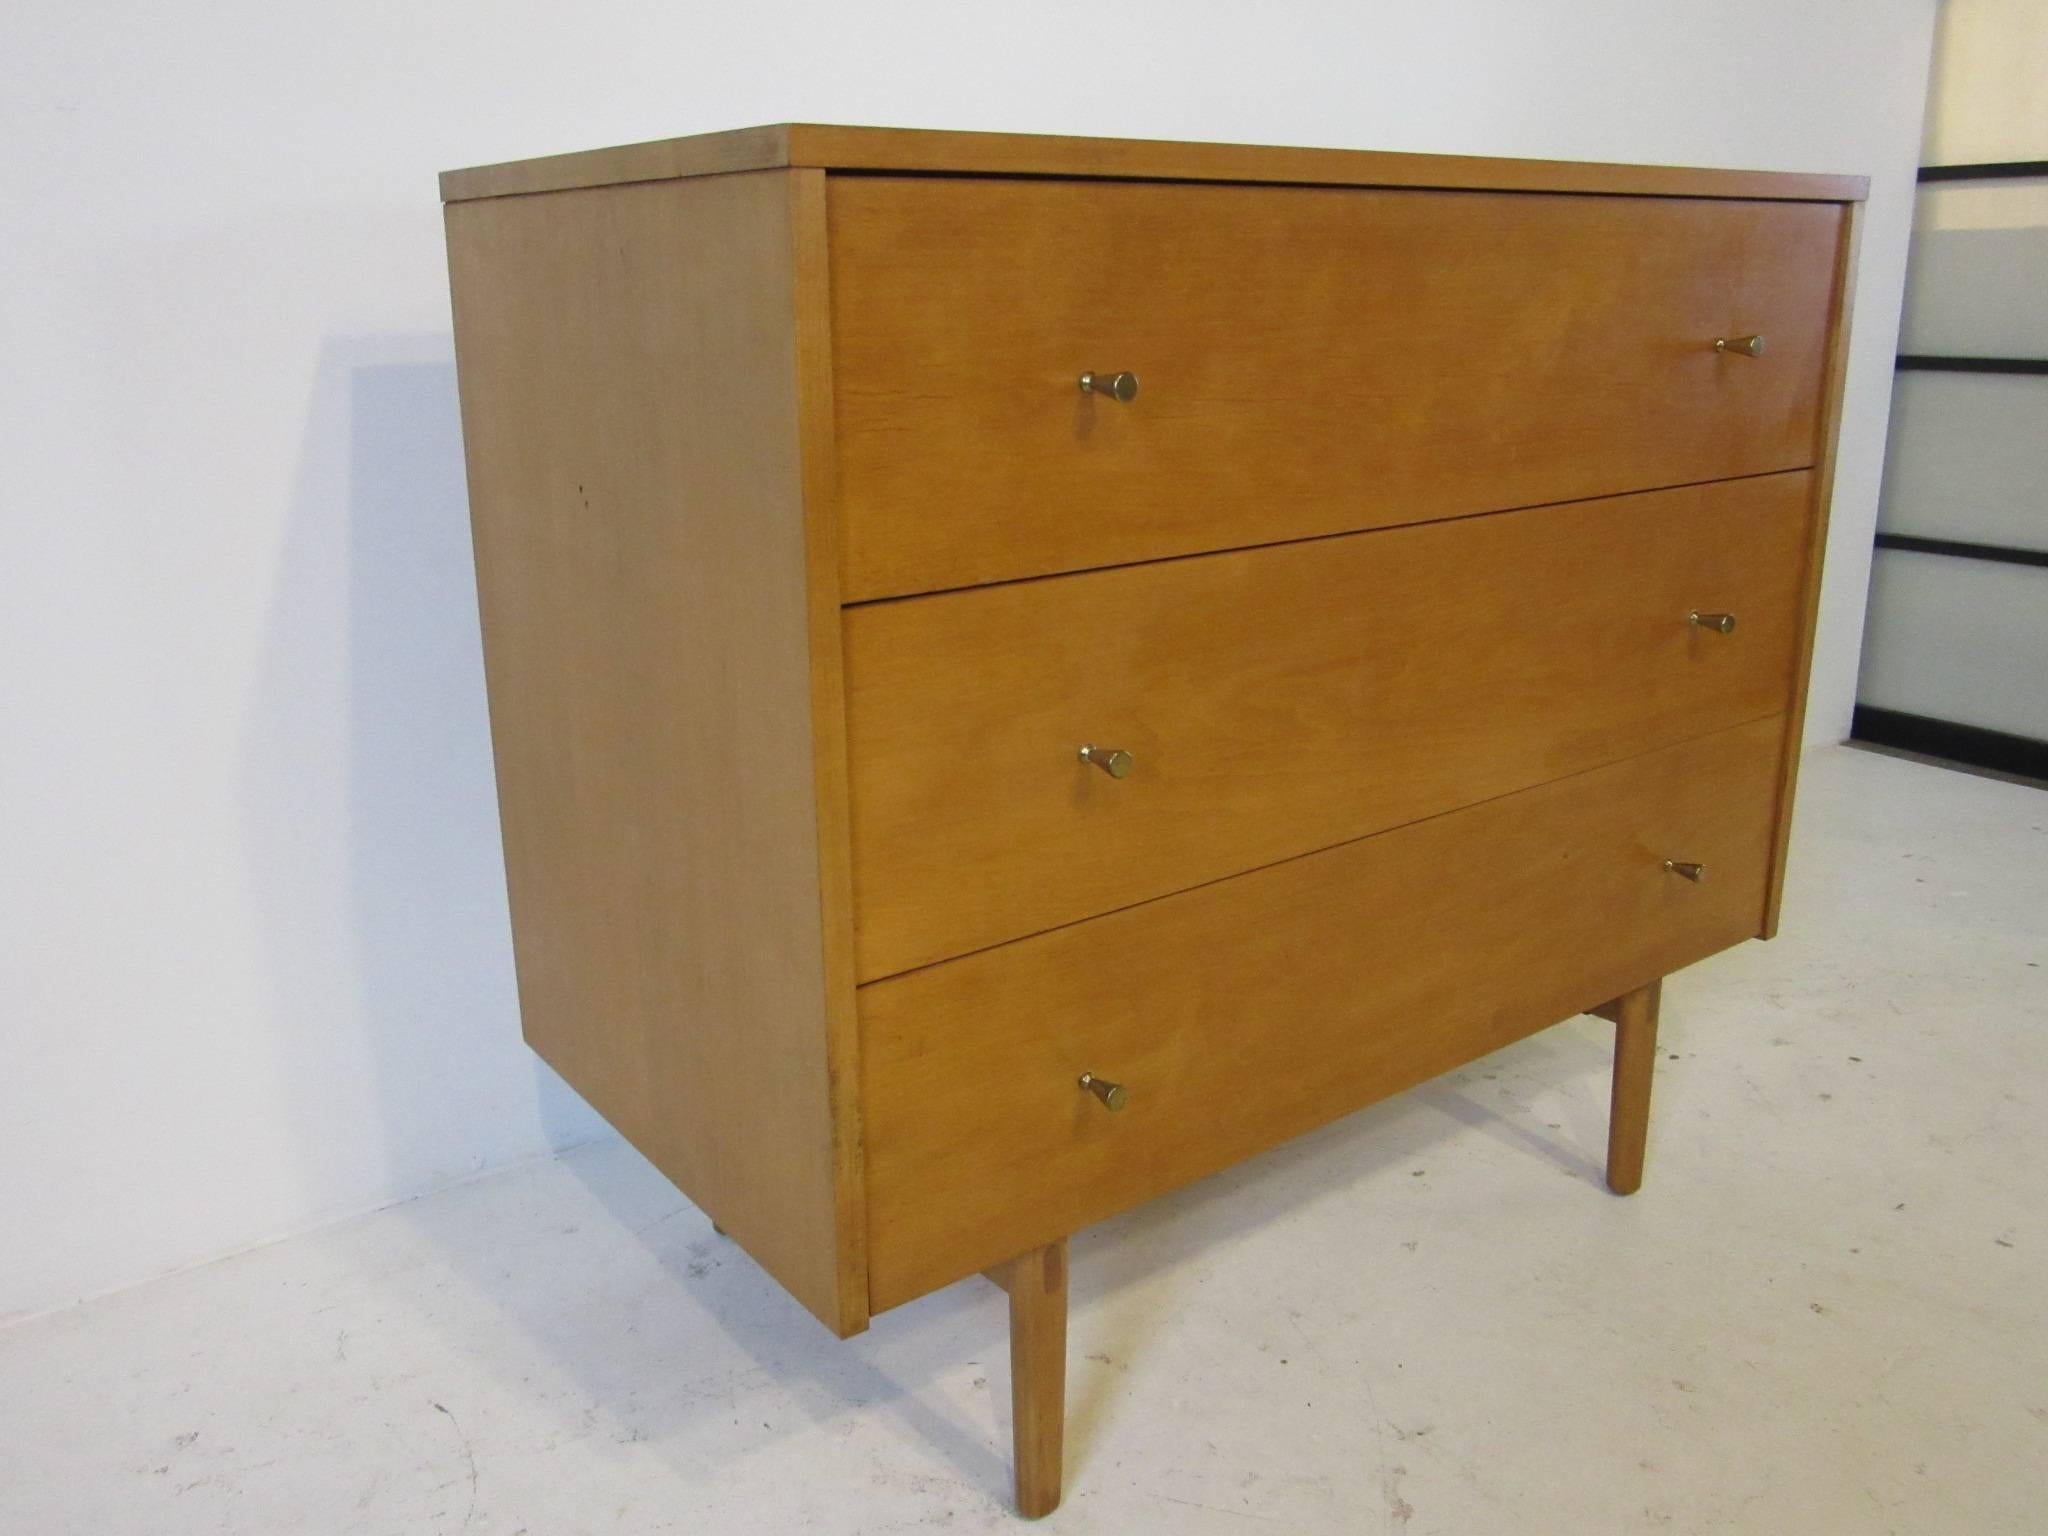 A three drawer dresser chest in maple wood with solid brass golf tee styled pulls sitting on wooden legs. Still retaining the original manufactures label designed by Paul McCobb from the Planner Group Line for the Winchendon Furniture Company.